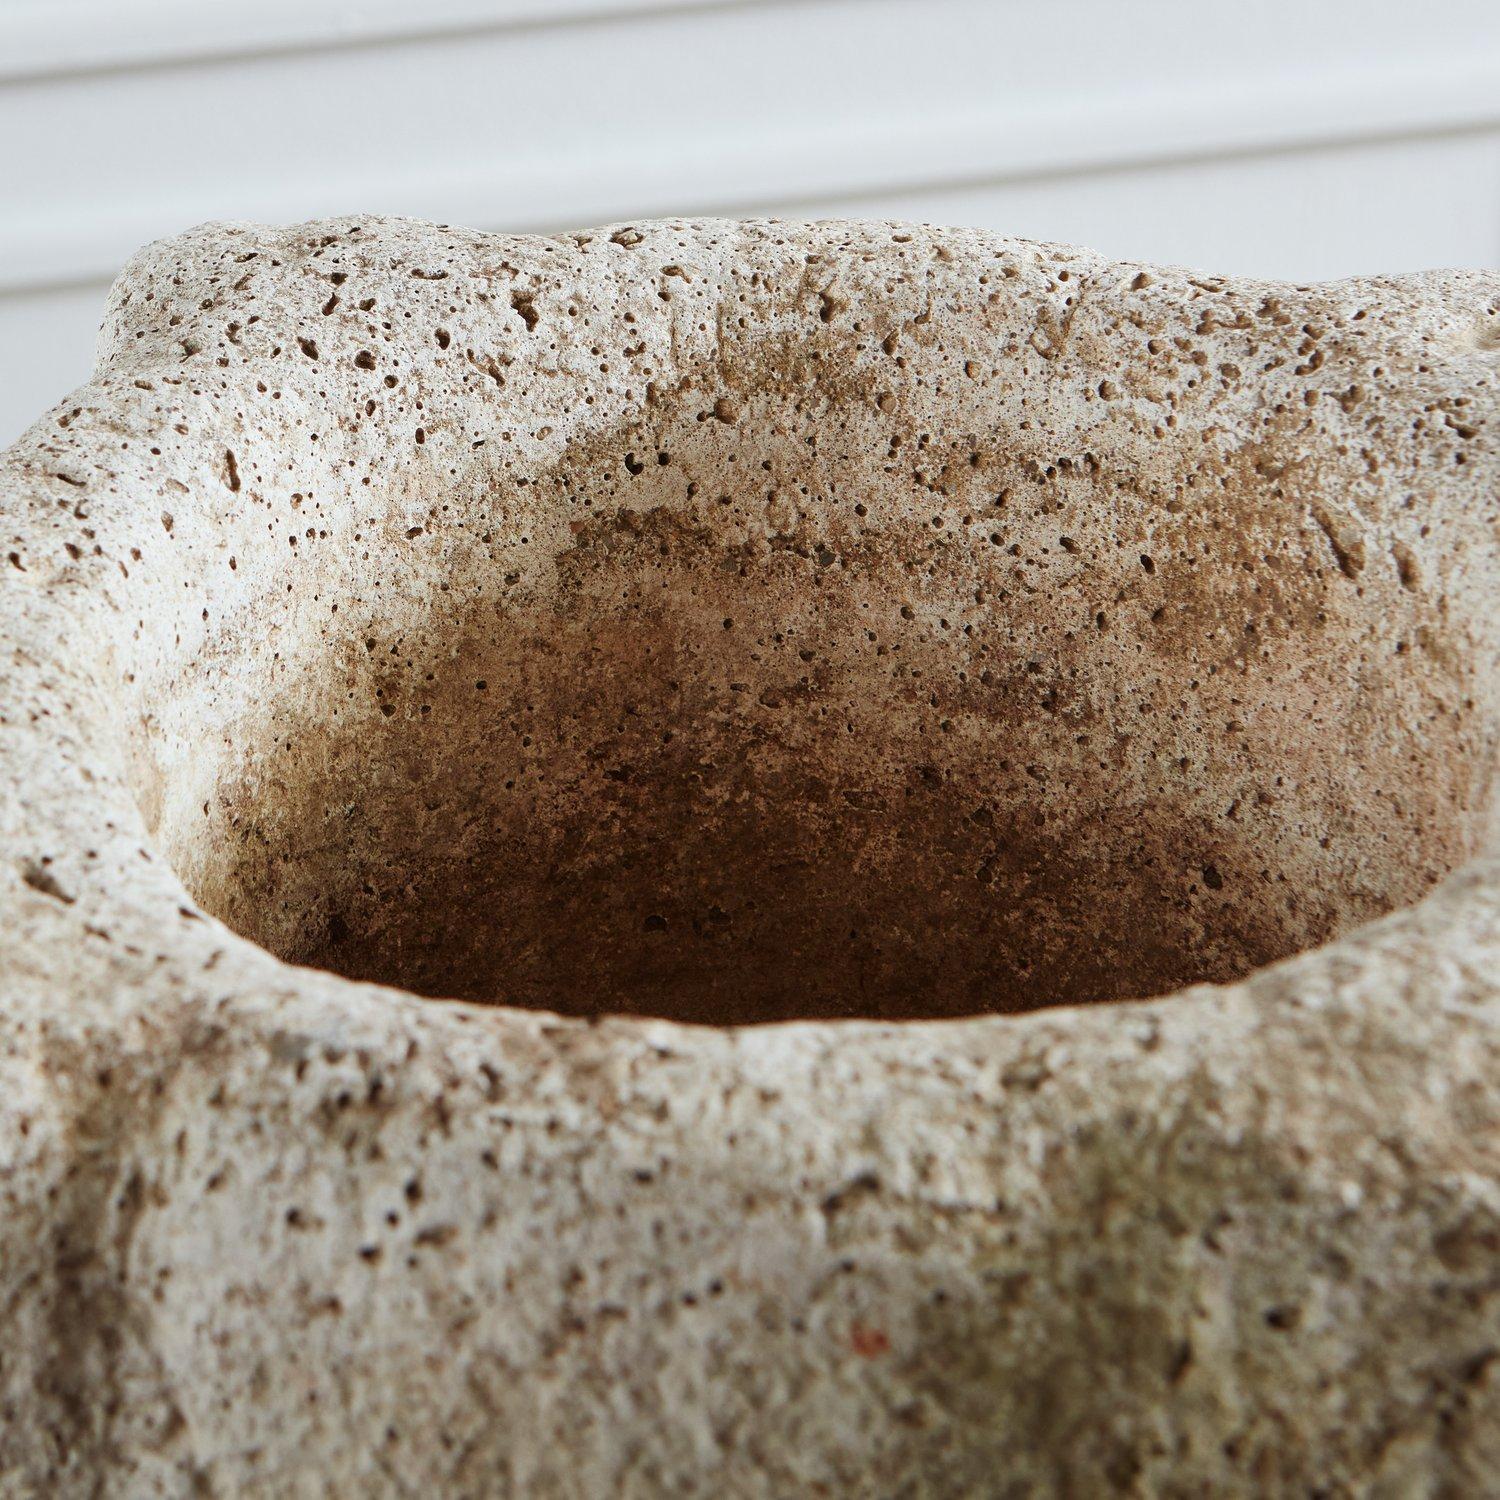 Organic Modern Stone Mortars, France 1940s - 2 Available For Sale